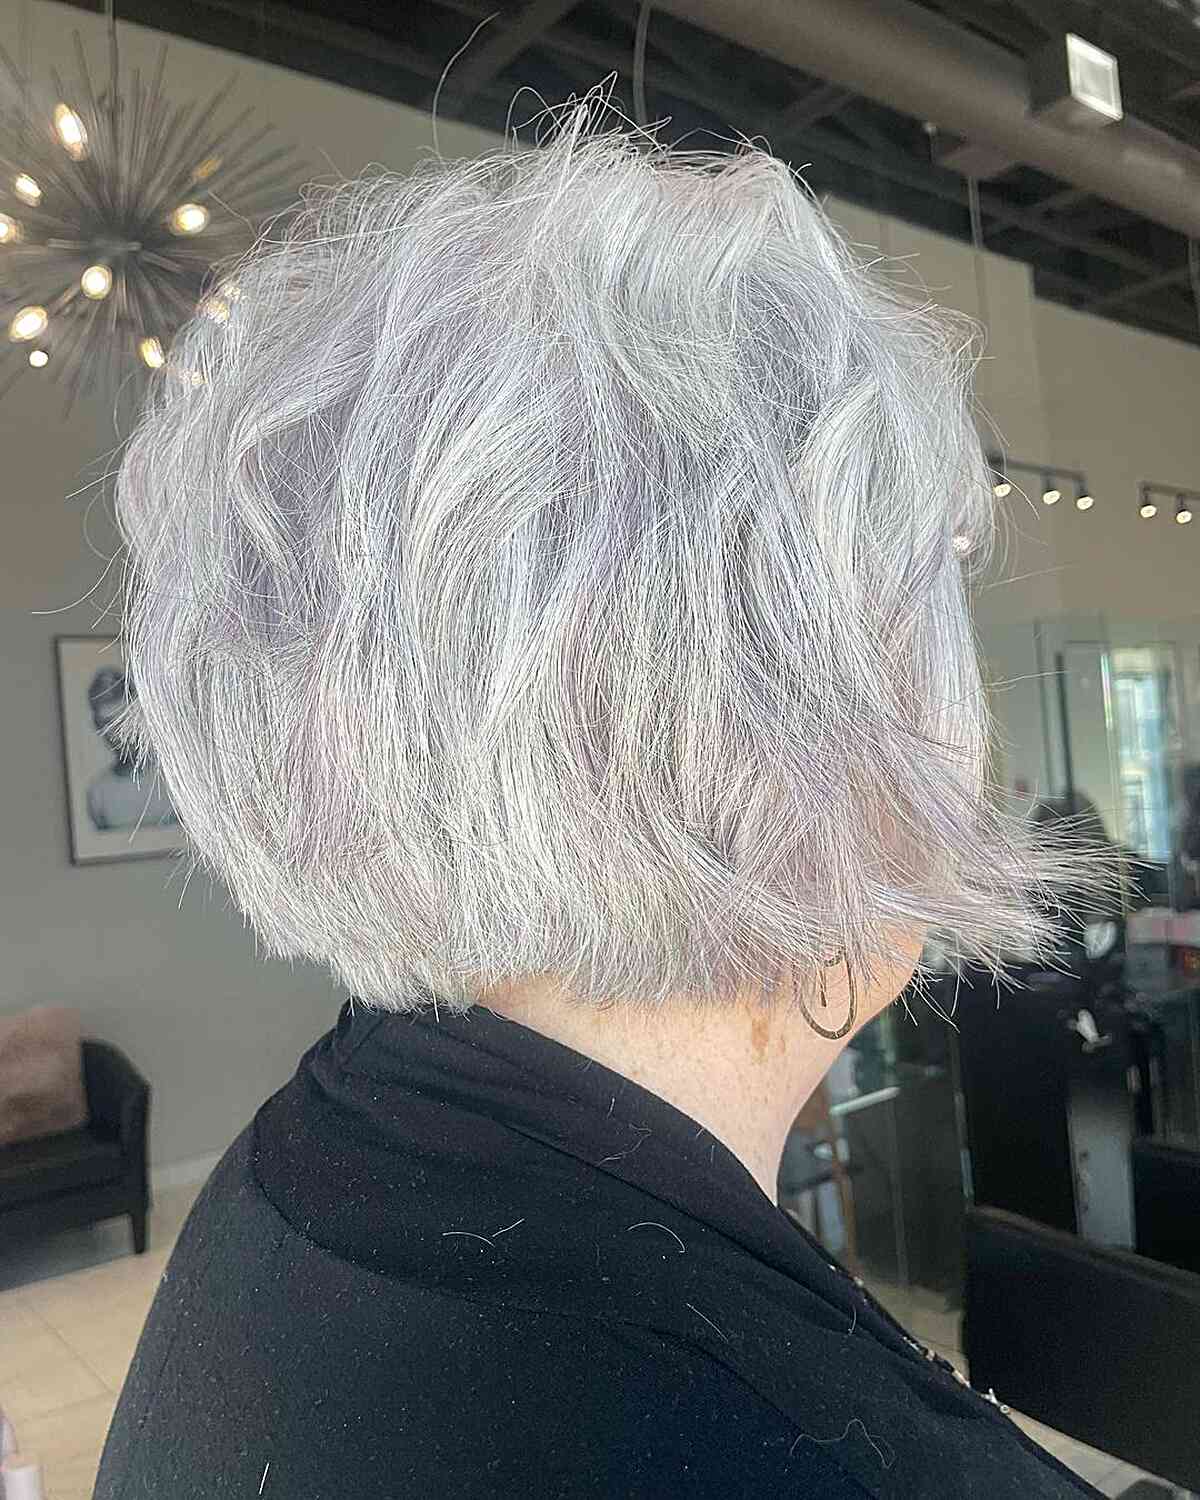 Chin-Length Tousled Hair with Choppy Layers for Grey Hair on Women Over 60